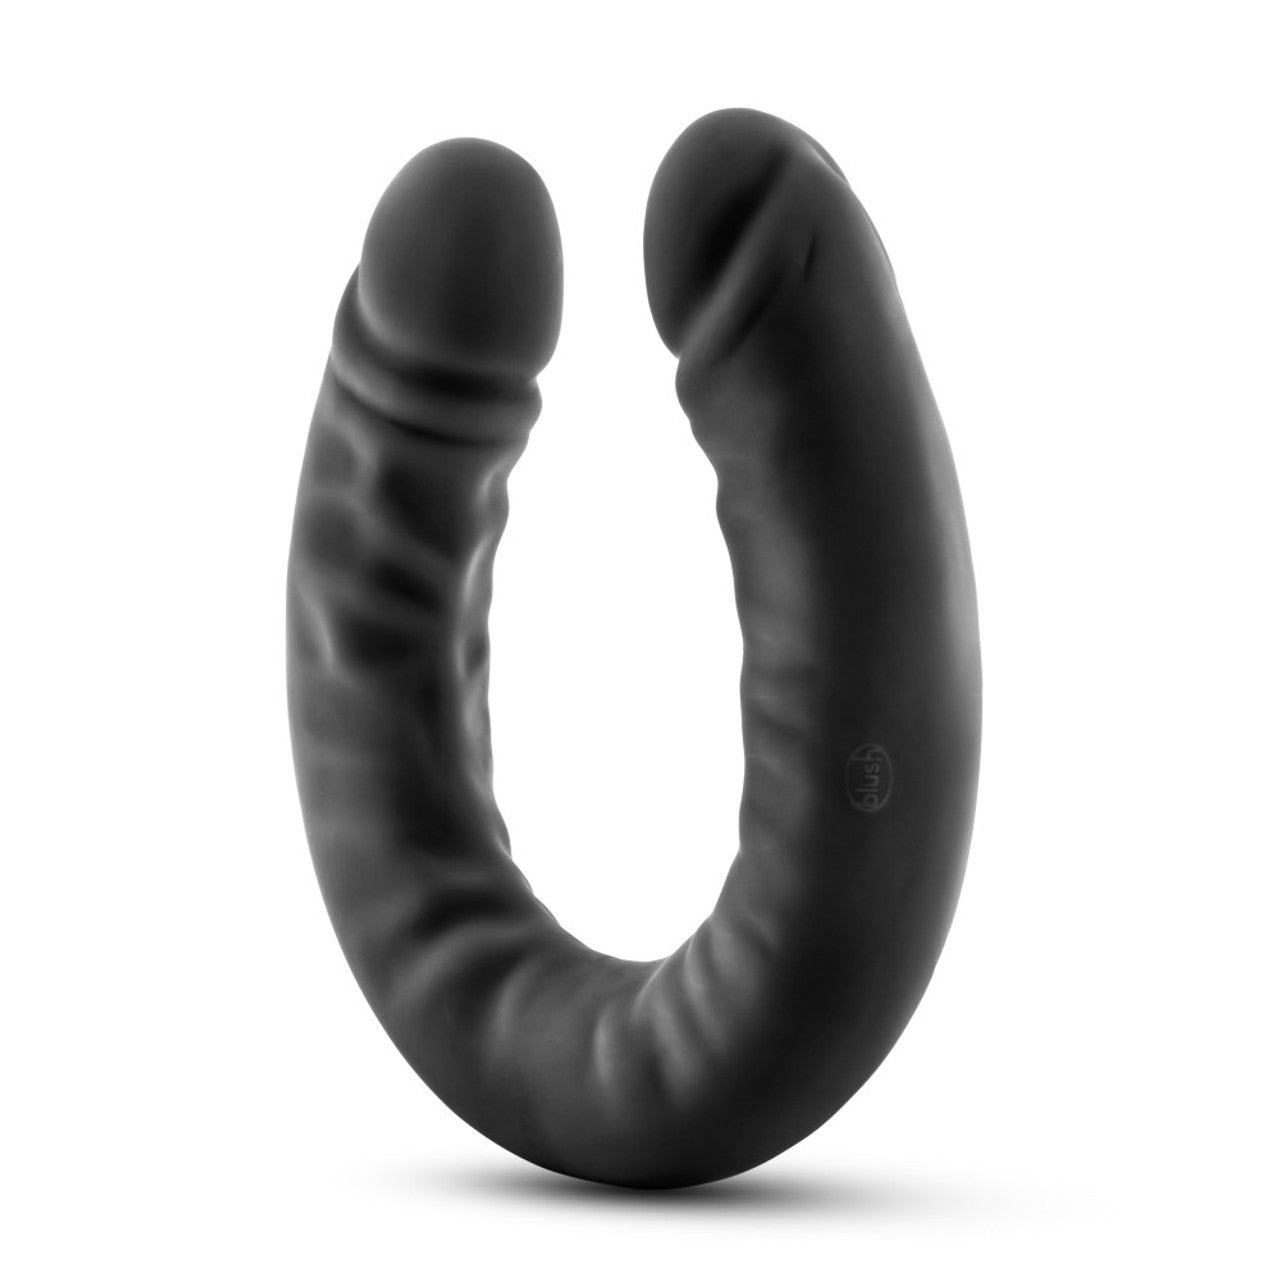 Ruse 18 inch Silicone Slim Double Dong - Black